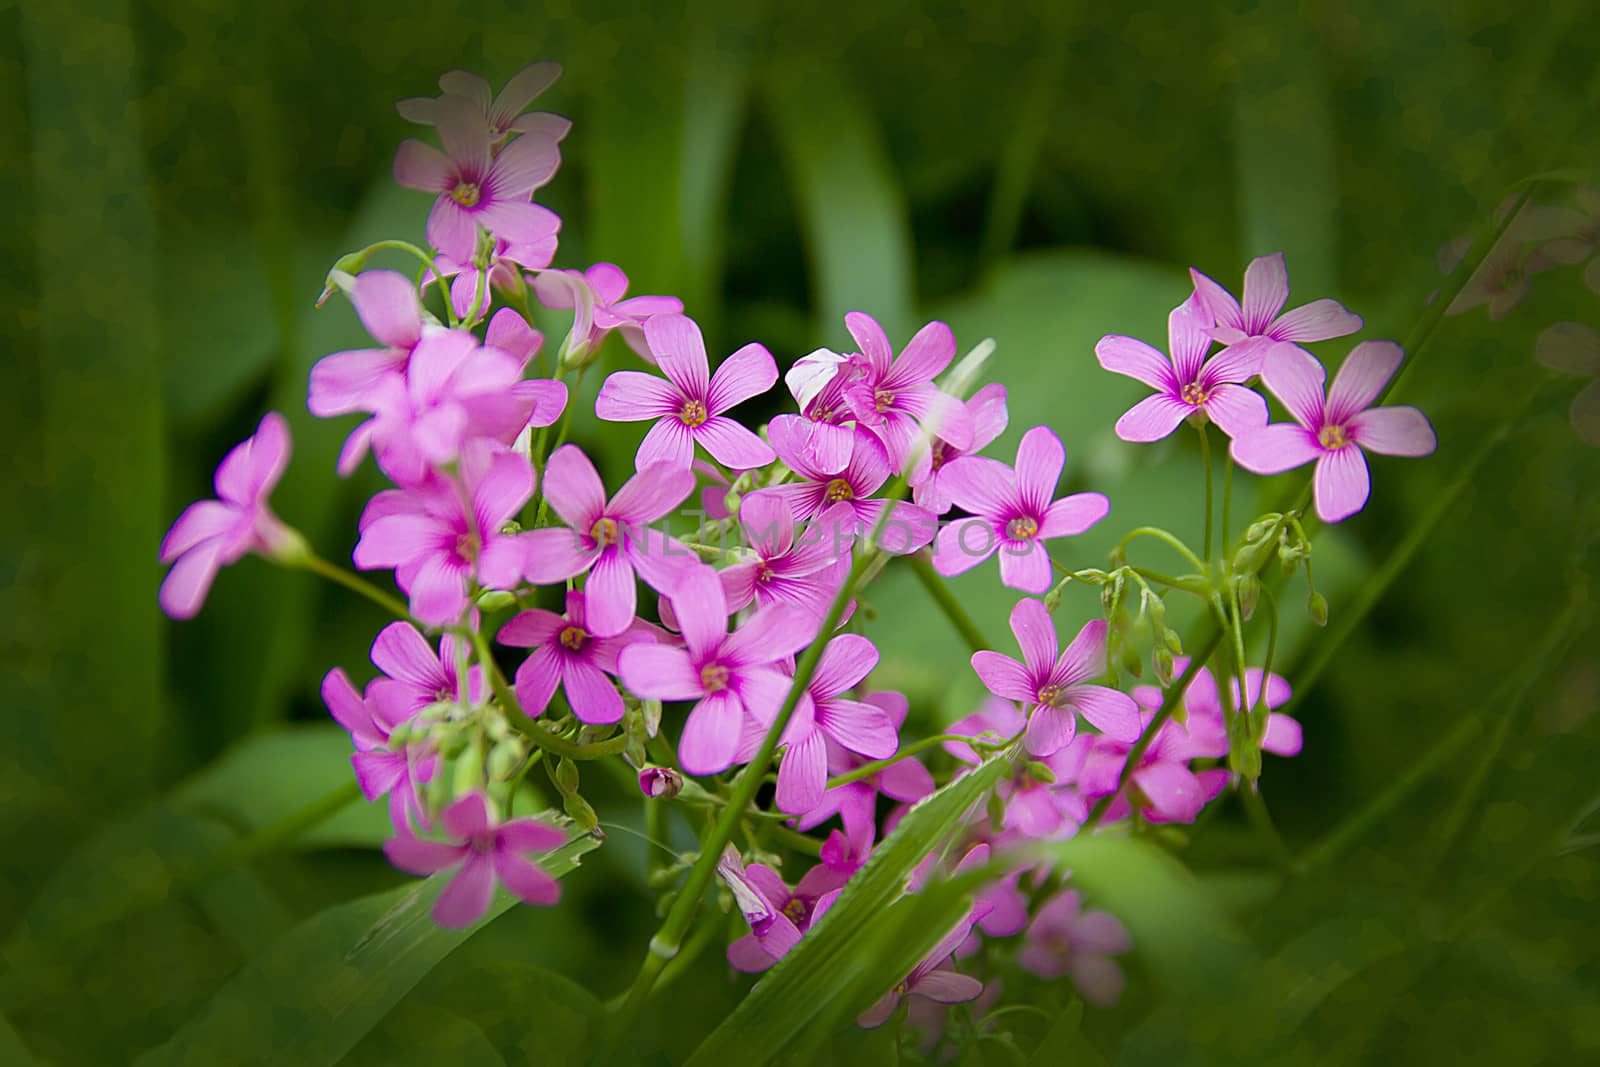 cluster of pink flowers with five petals in green background.